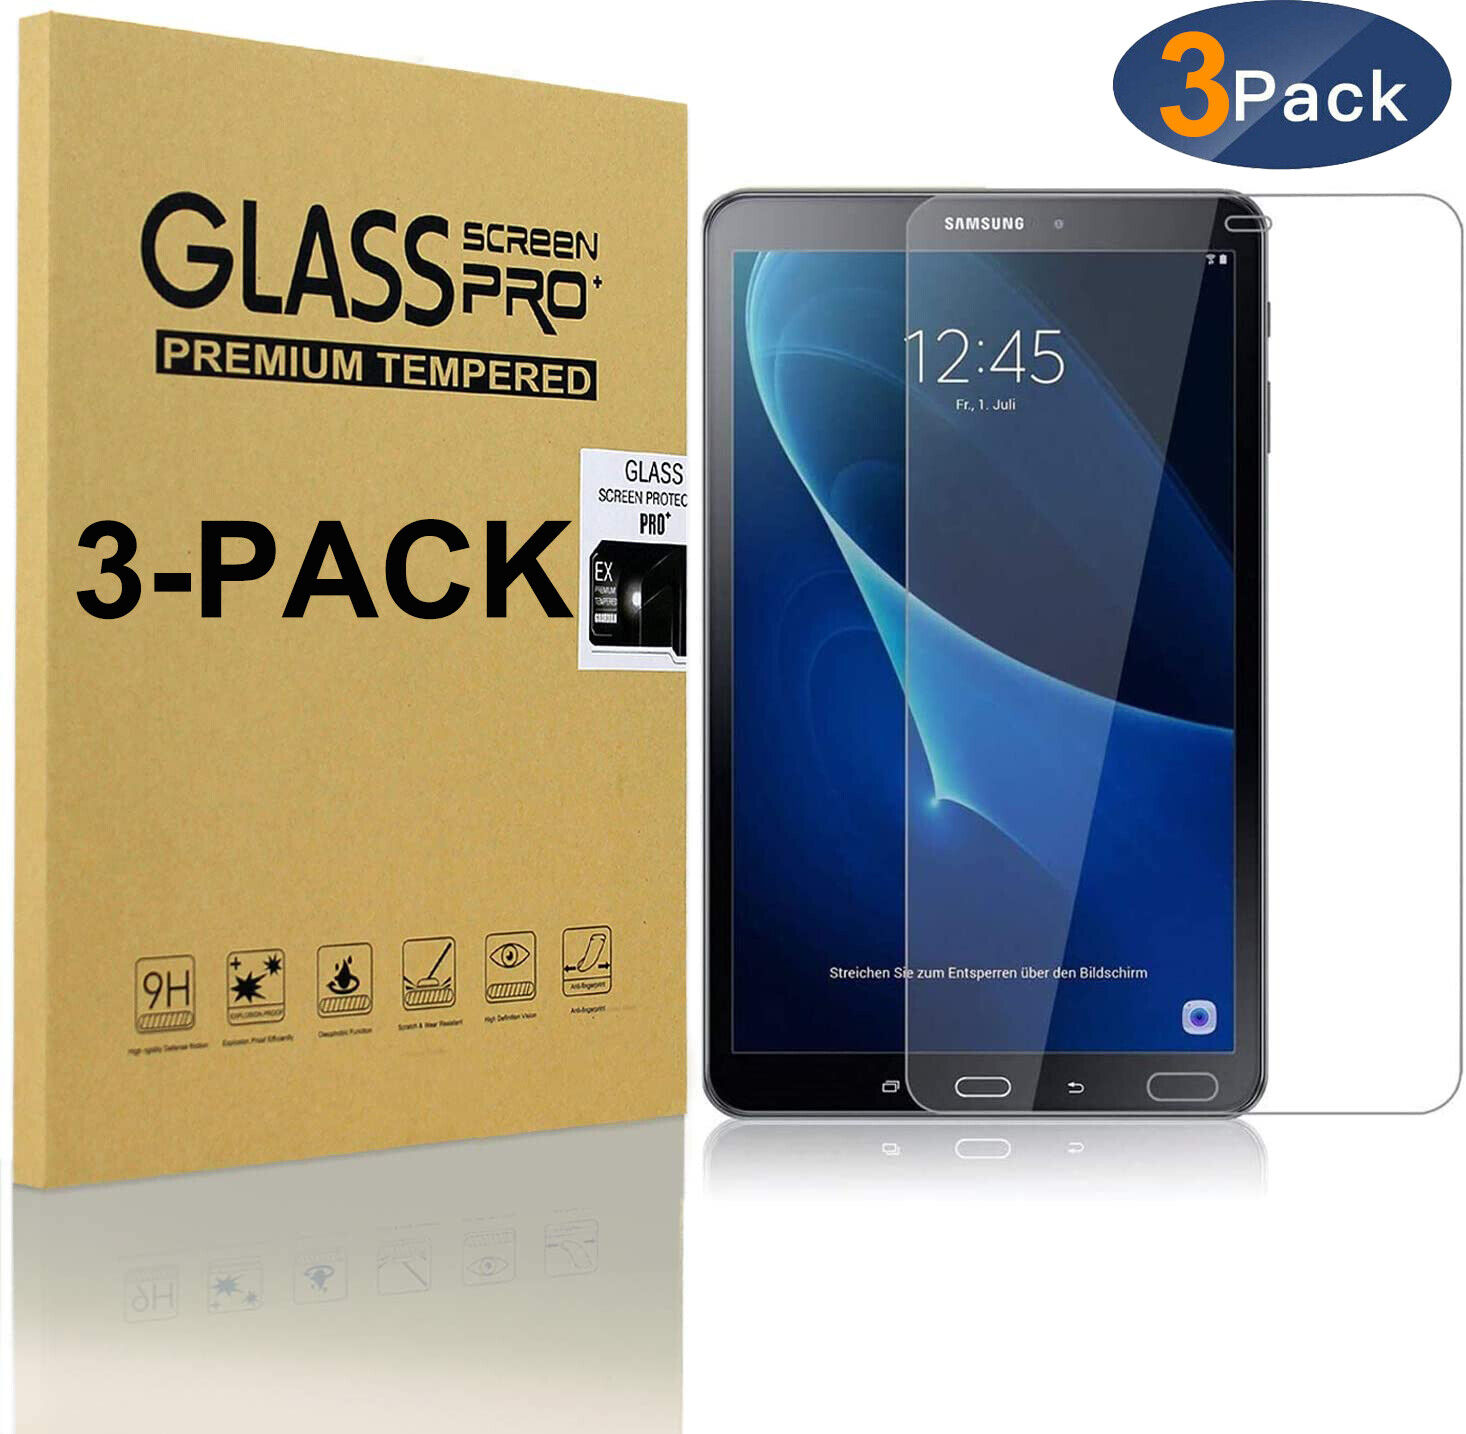 3 PACK Tempered Glass Screen Protector for Samsung Galaxy Tab A 10.1 SM-T580